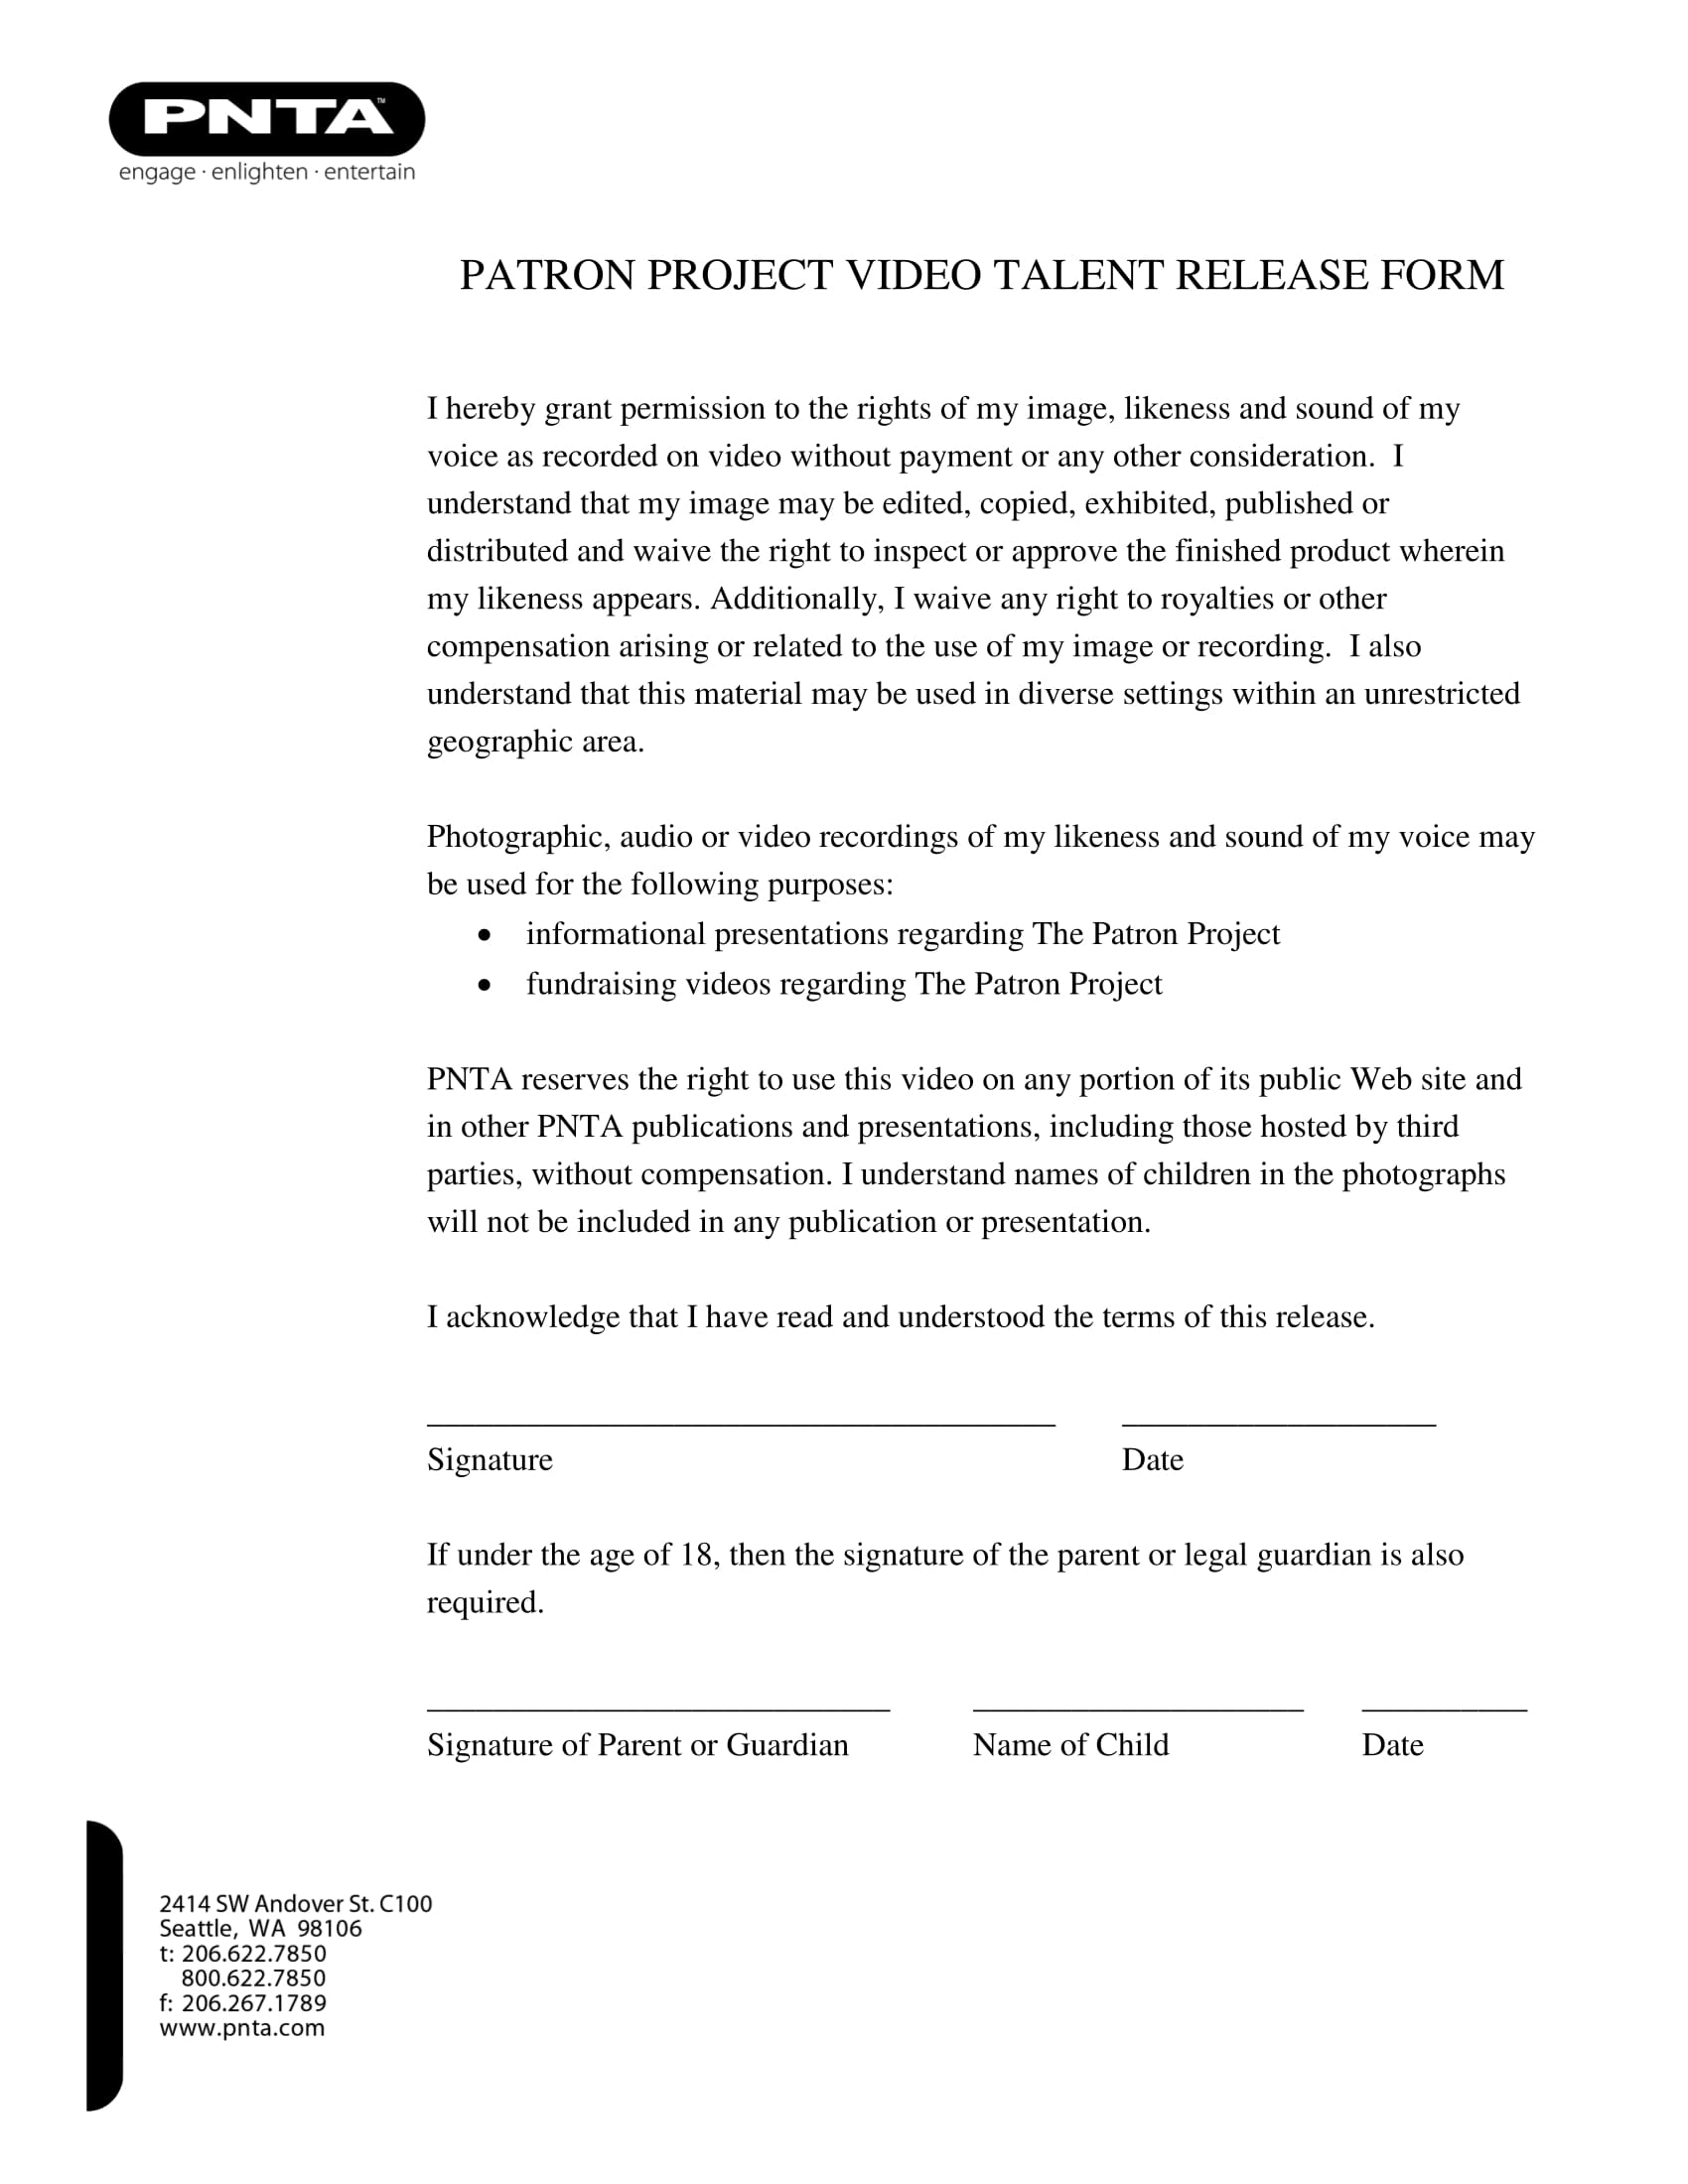 video talent release form 1